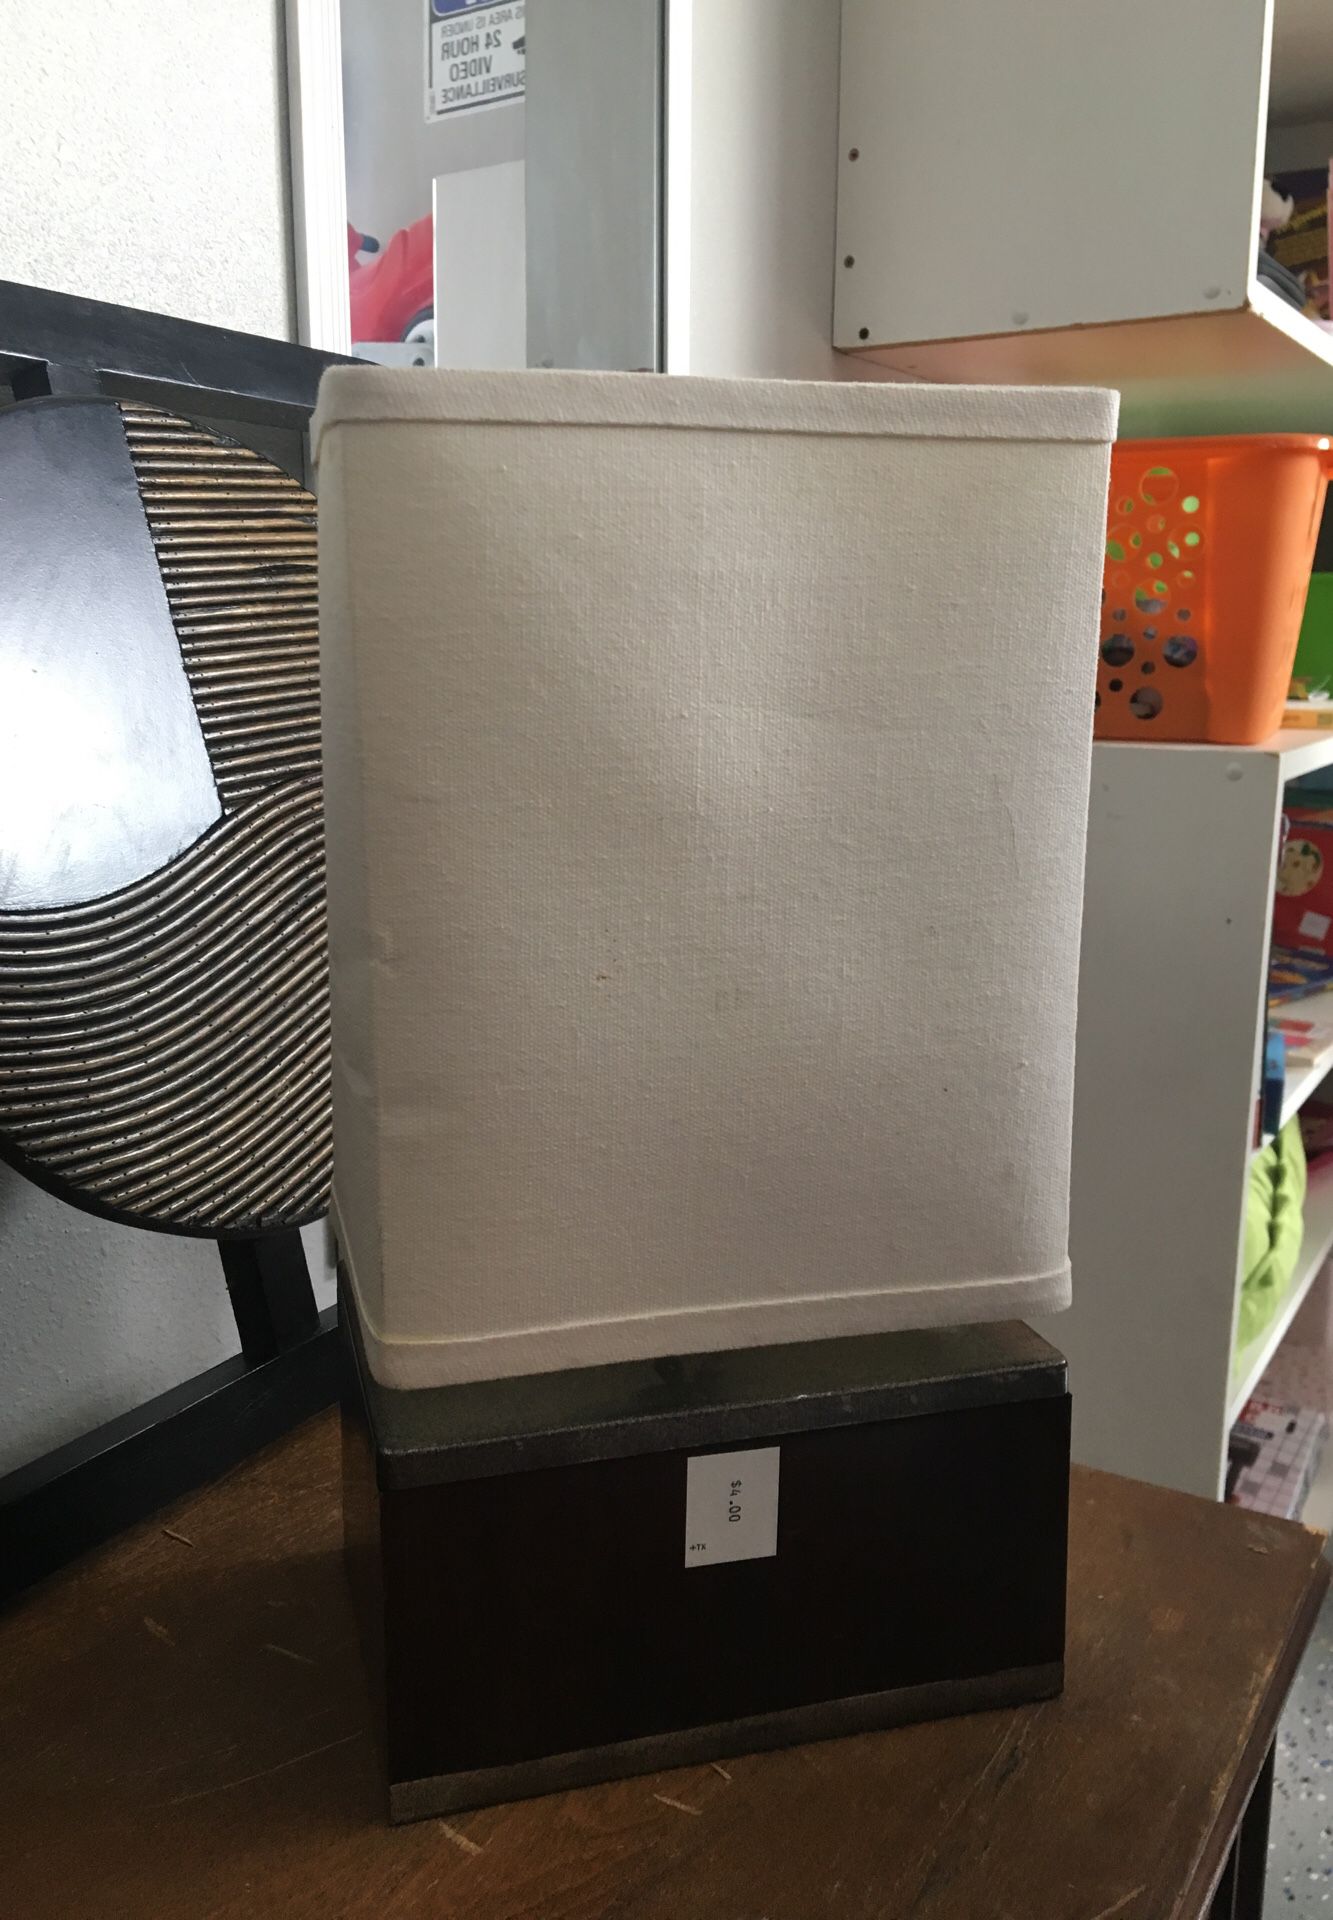 Desk Lamp with lamp shade